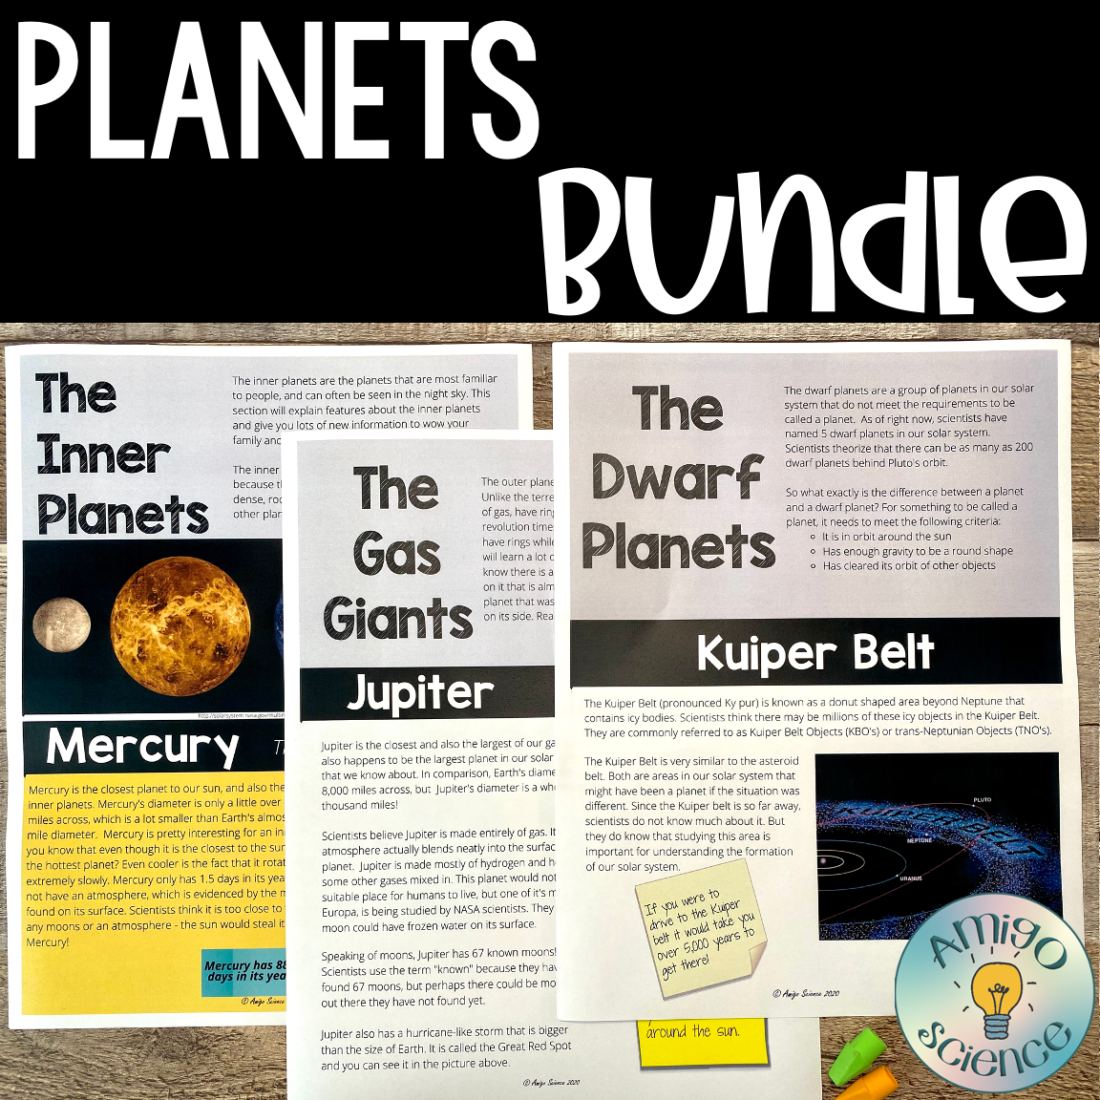 Planets of the solar system bundle of inner planets, gas giants and dwarf planets